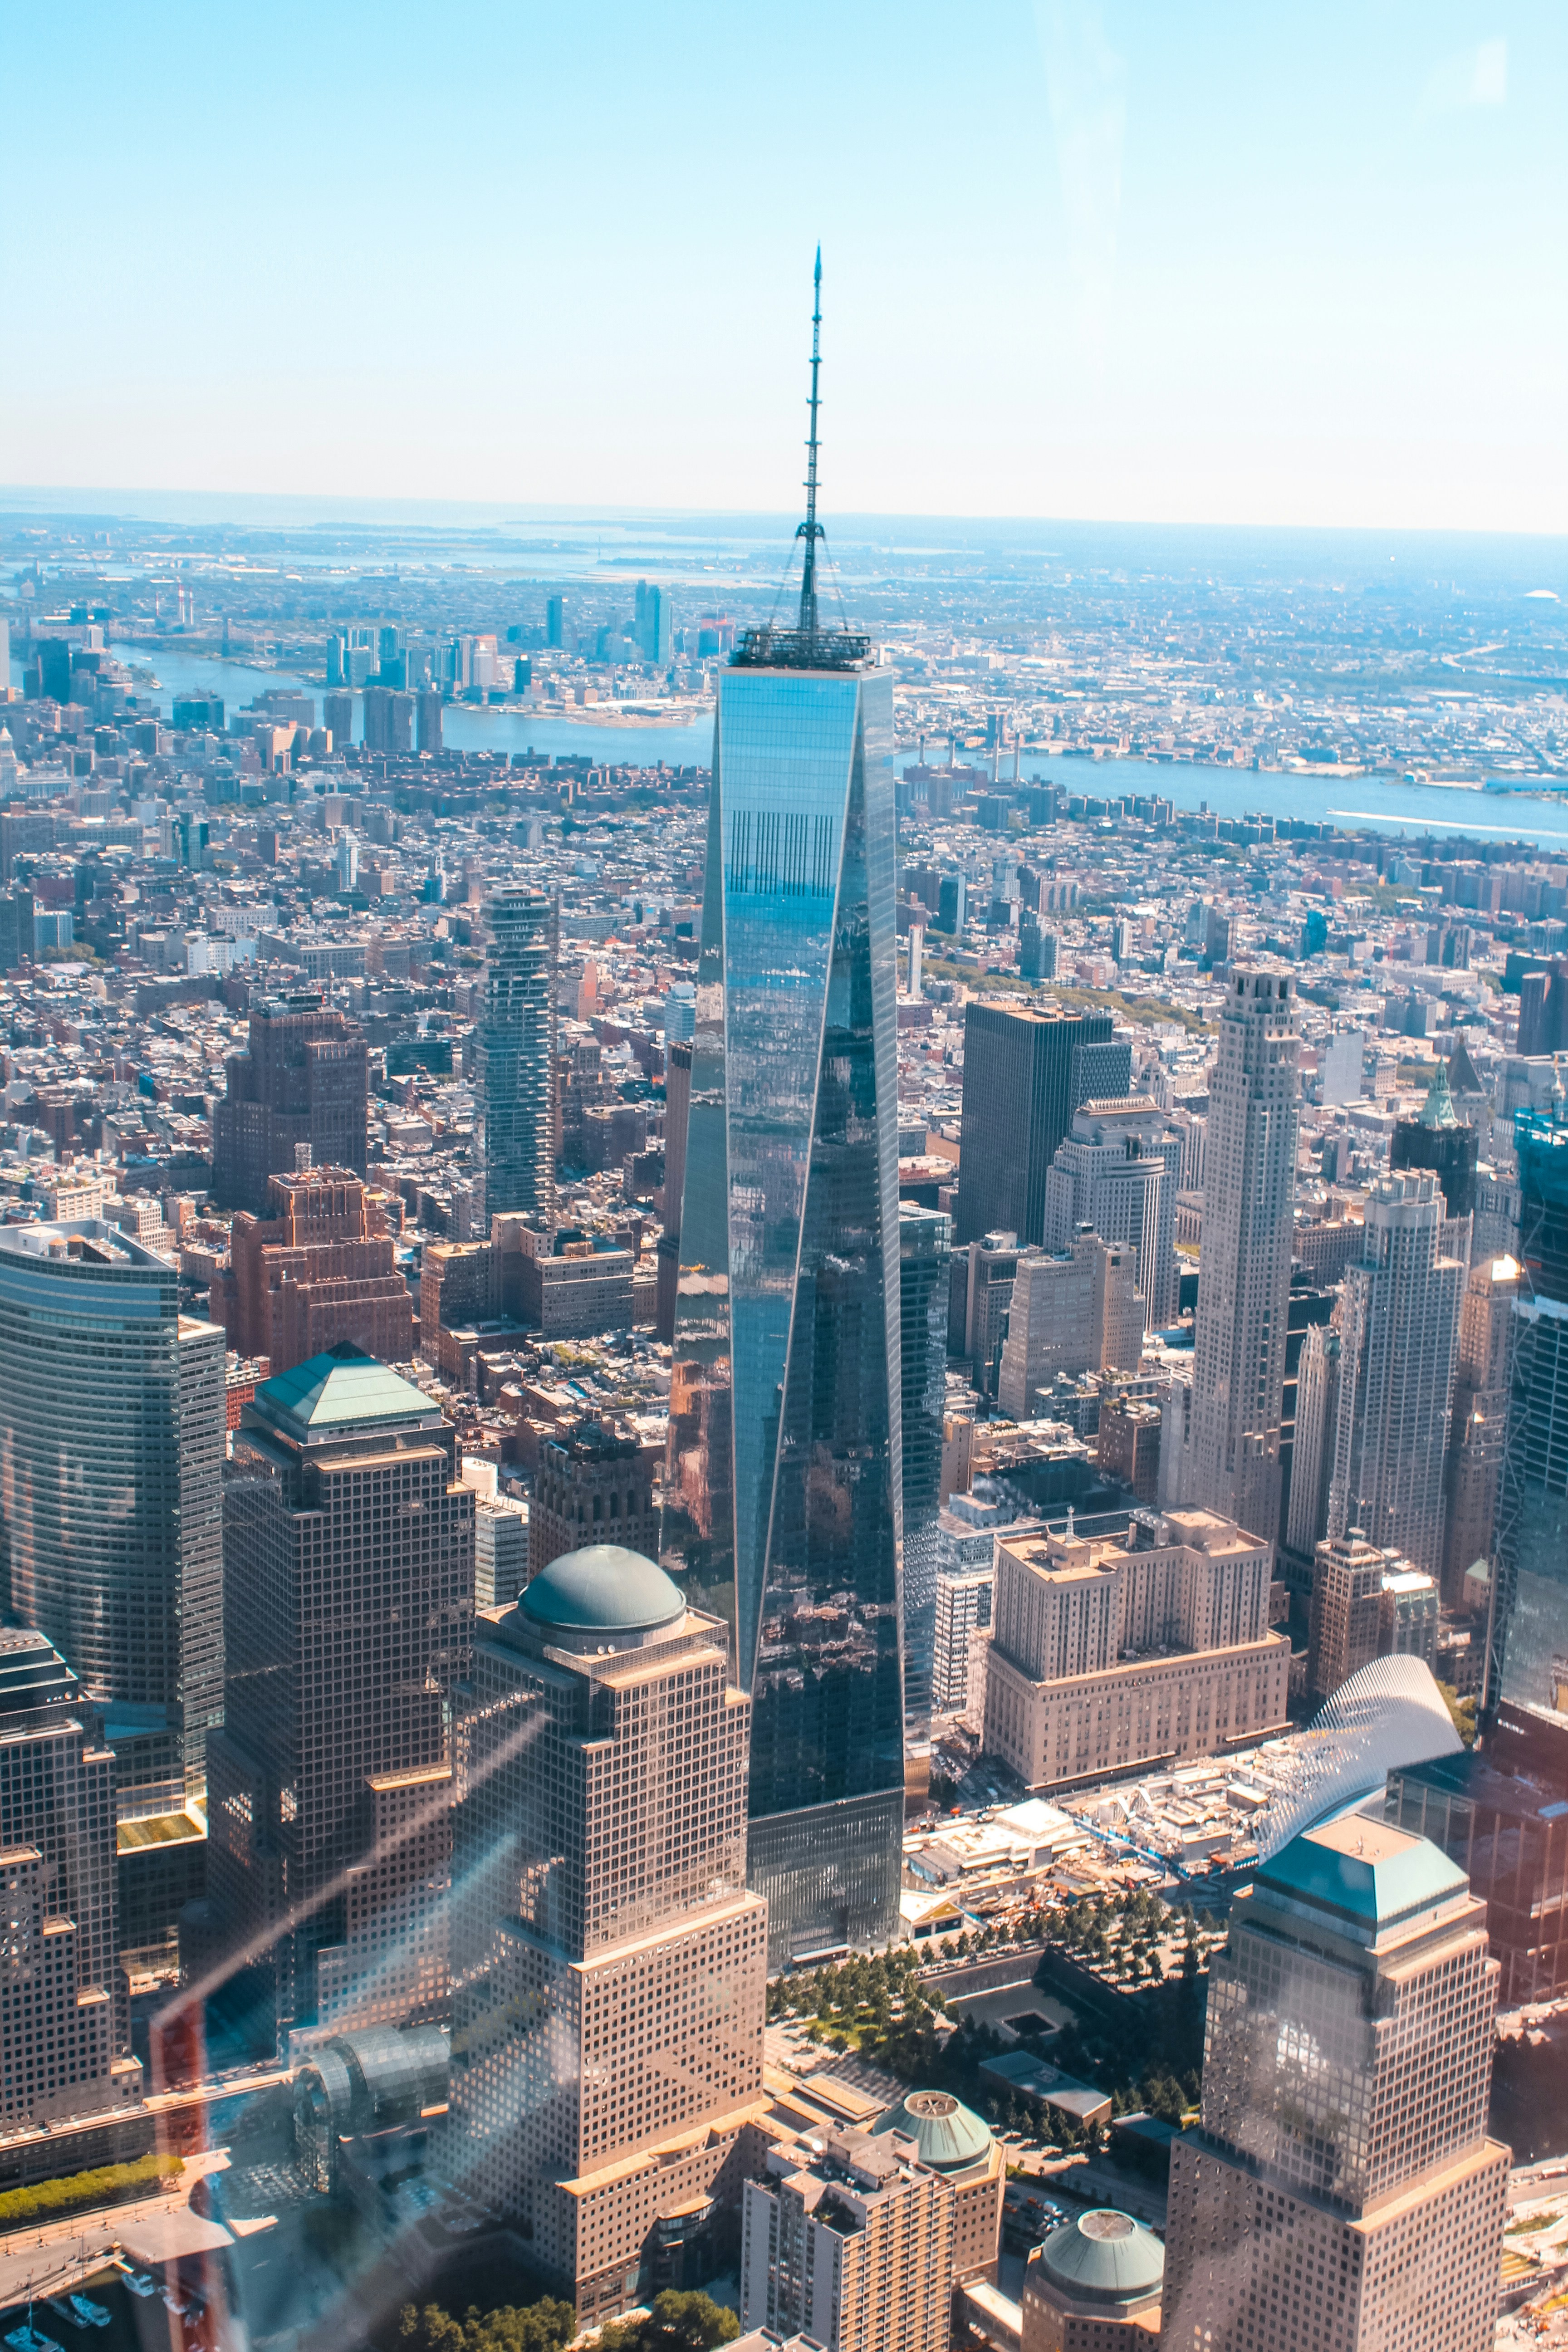 View of the new world trade centre from a helicopter